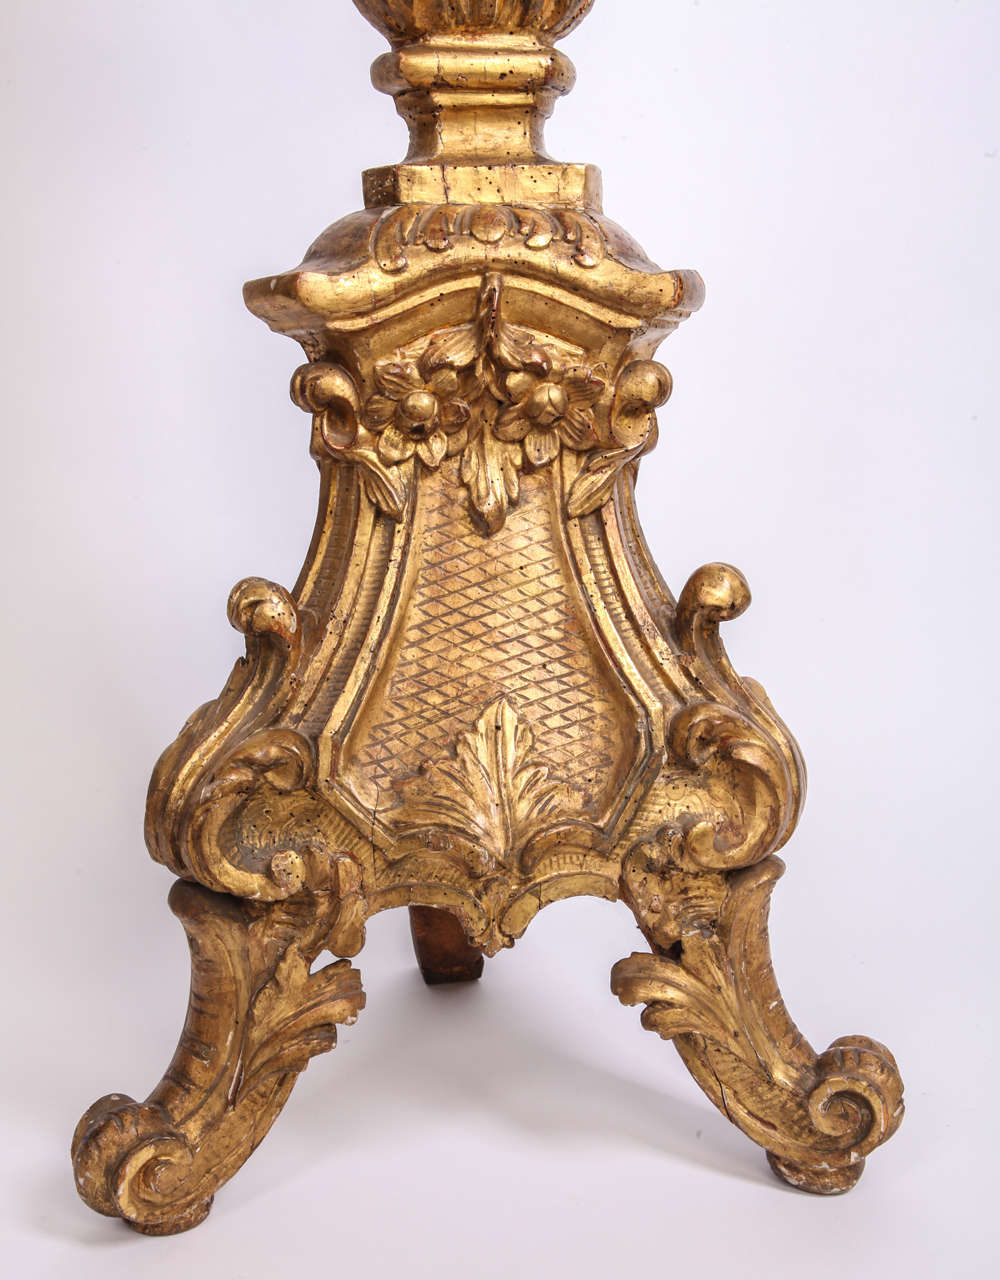 Baroque Italian Early 18th Century Giltwood Torchiere or Floor Lamp 1720 For Sale